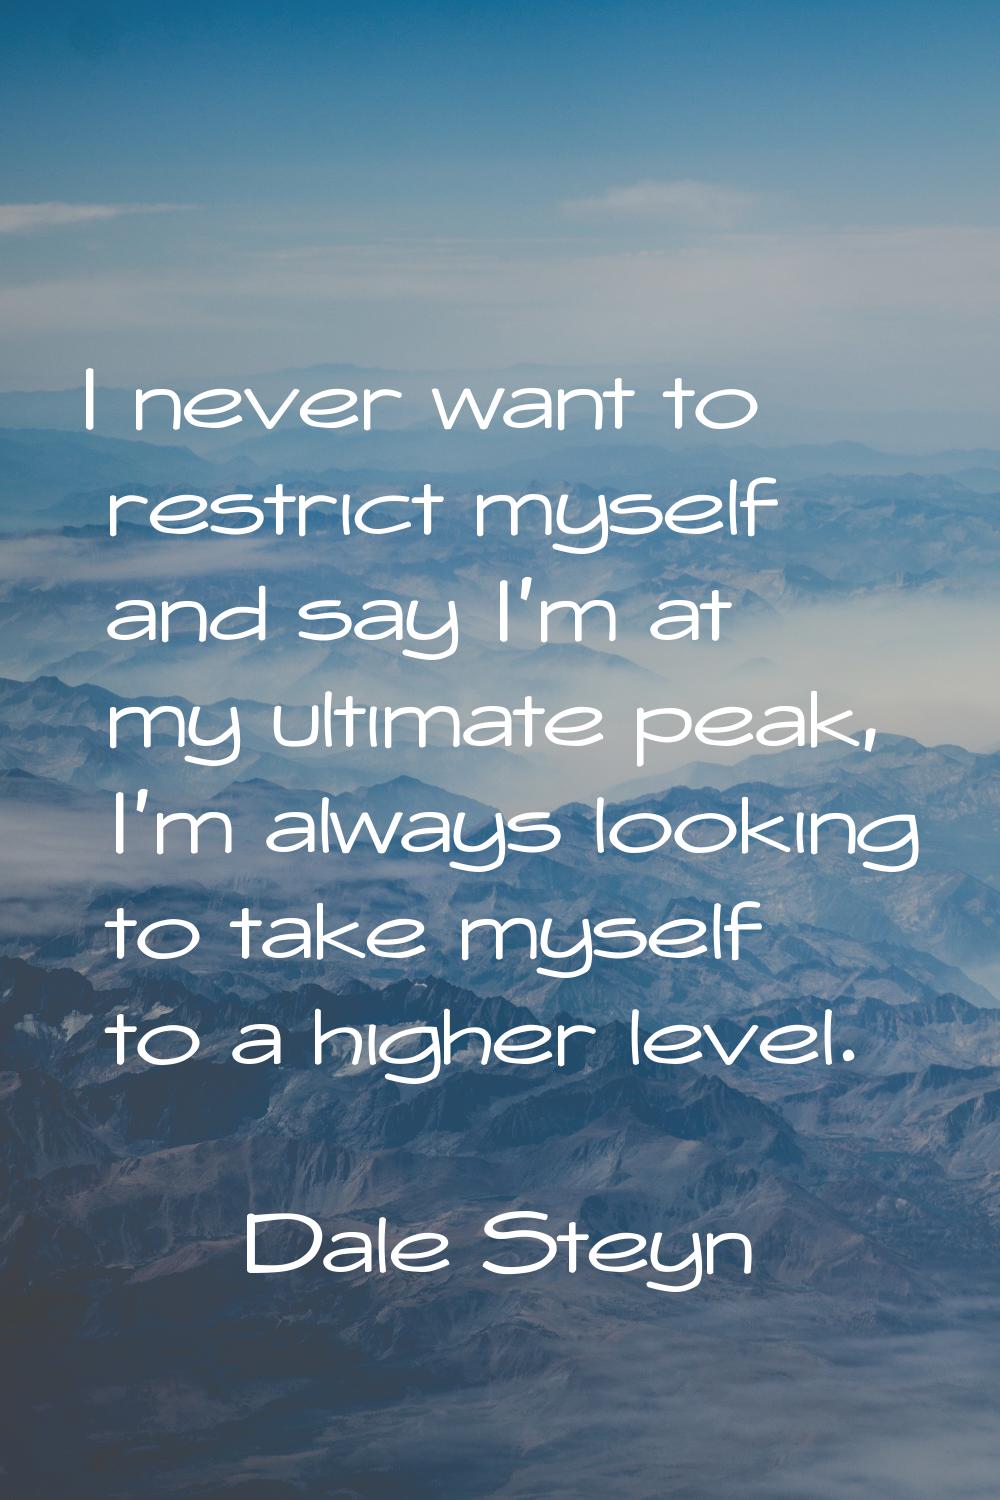 I never want to restrict myself and say I'm at my ultimate peak, I'm always looking to take myself 